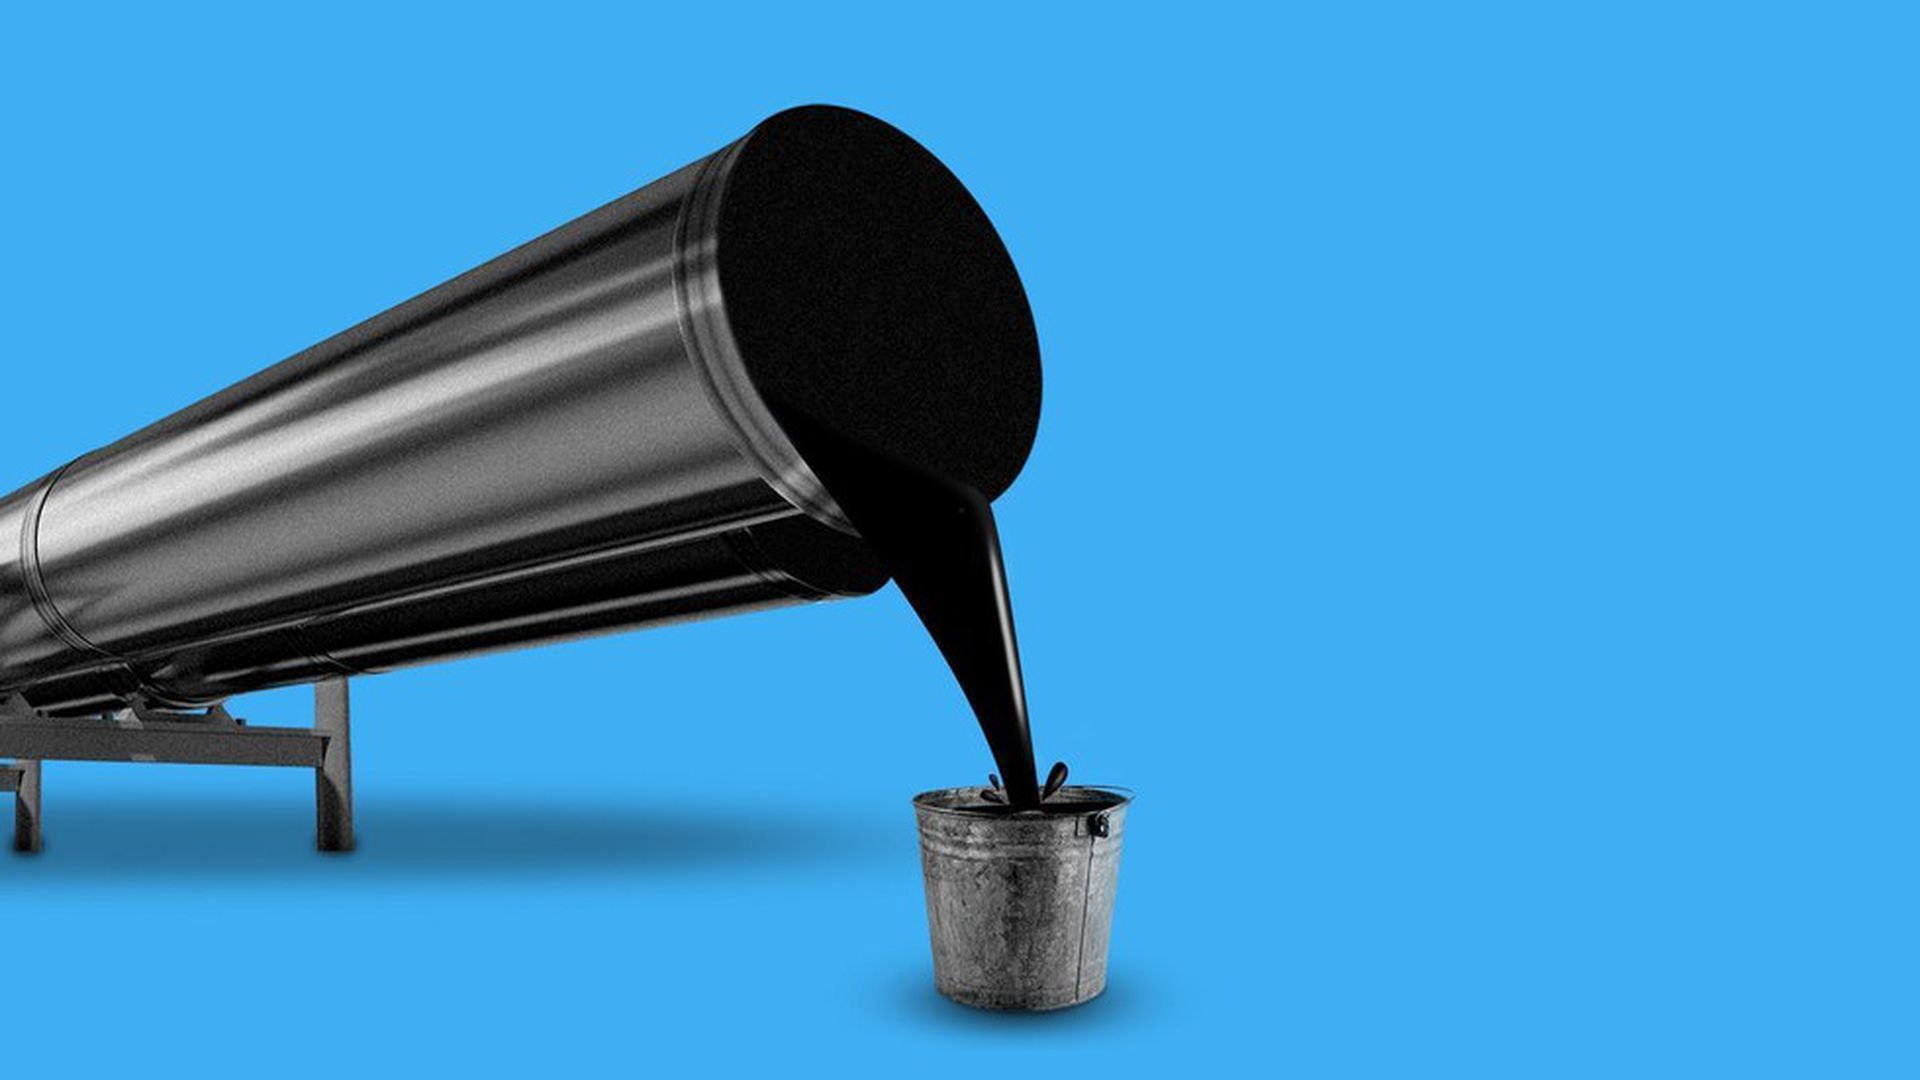 In this illustration, oil pours out of a metal container into a small bucket. There is a bright blue background.